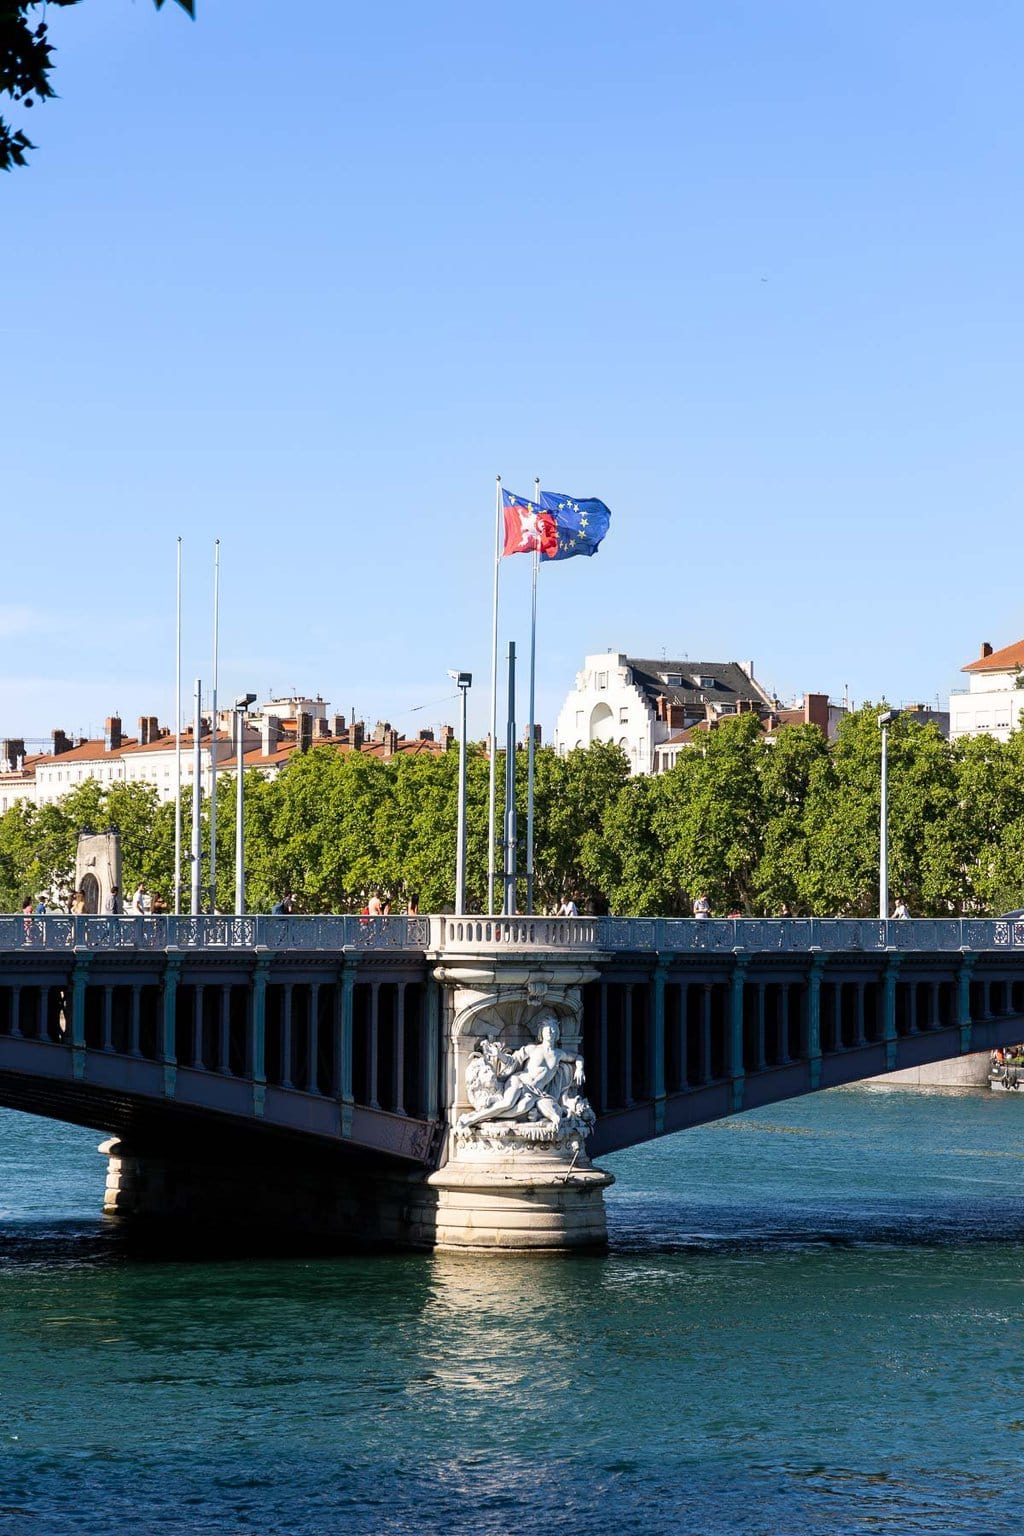 Vertical photo of one of the bridges over the River Rhone in Lyon, France.